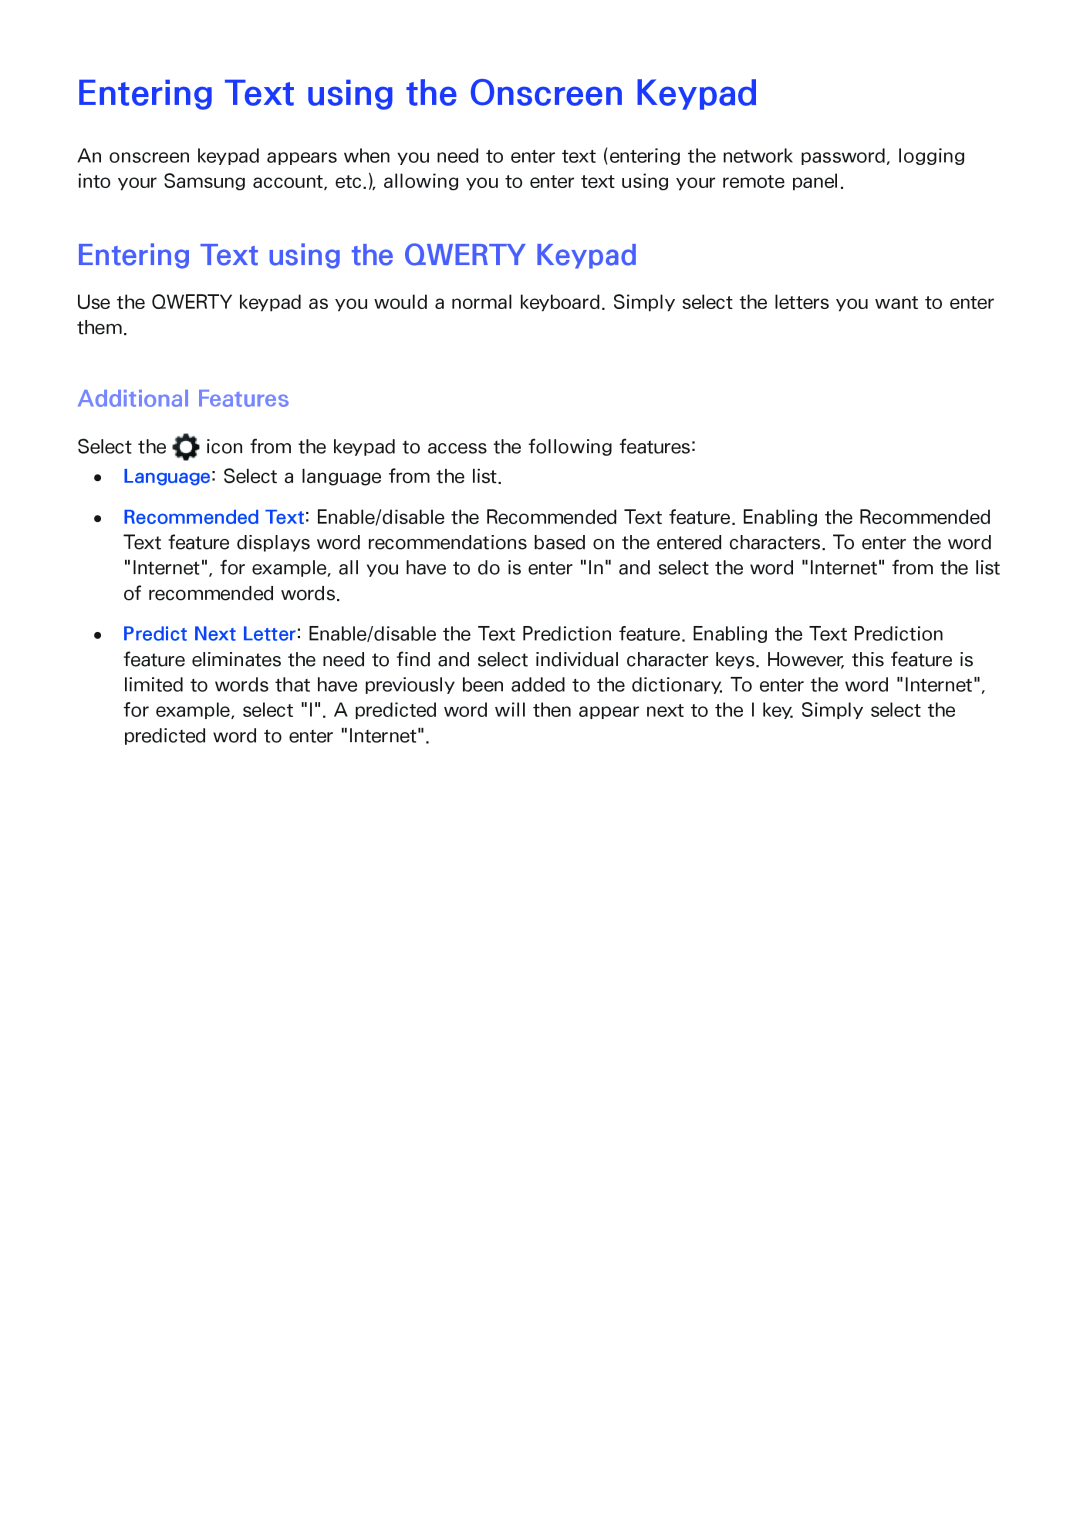 Samsung SEK-1000 manual Entering Text using the Onscreen Keypad, Entering Text using the QWERTY Keypad, Additional Features 